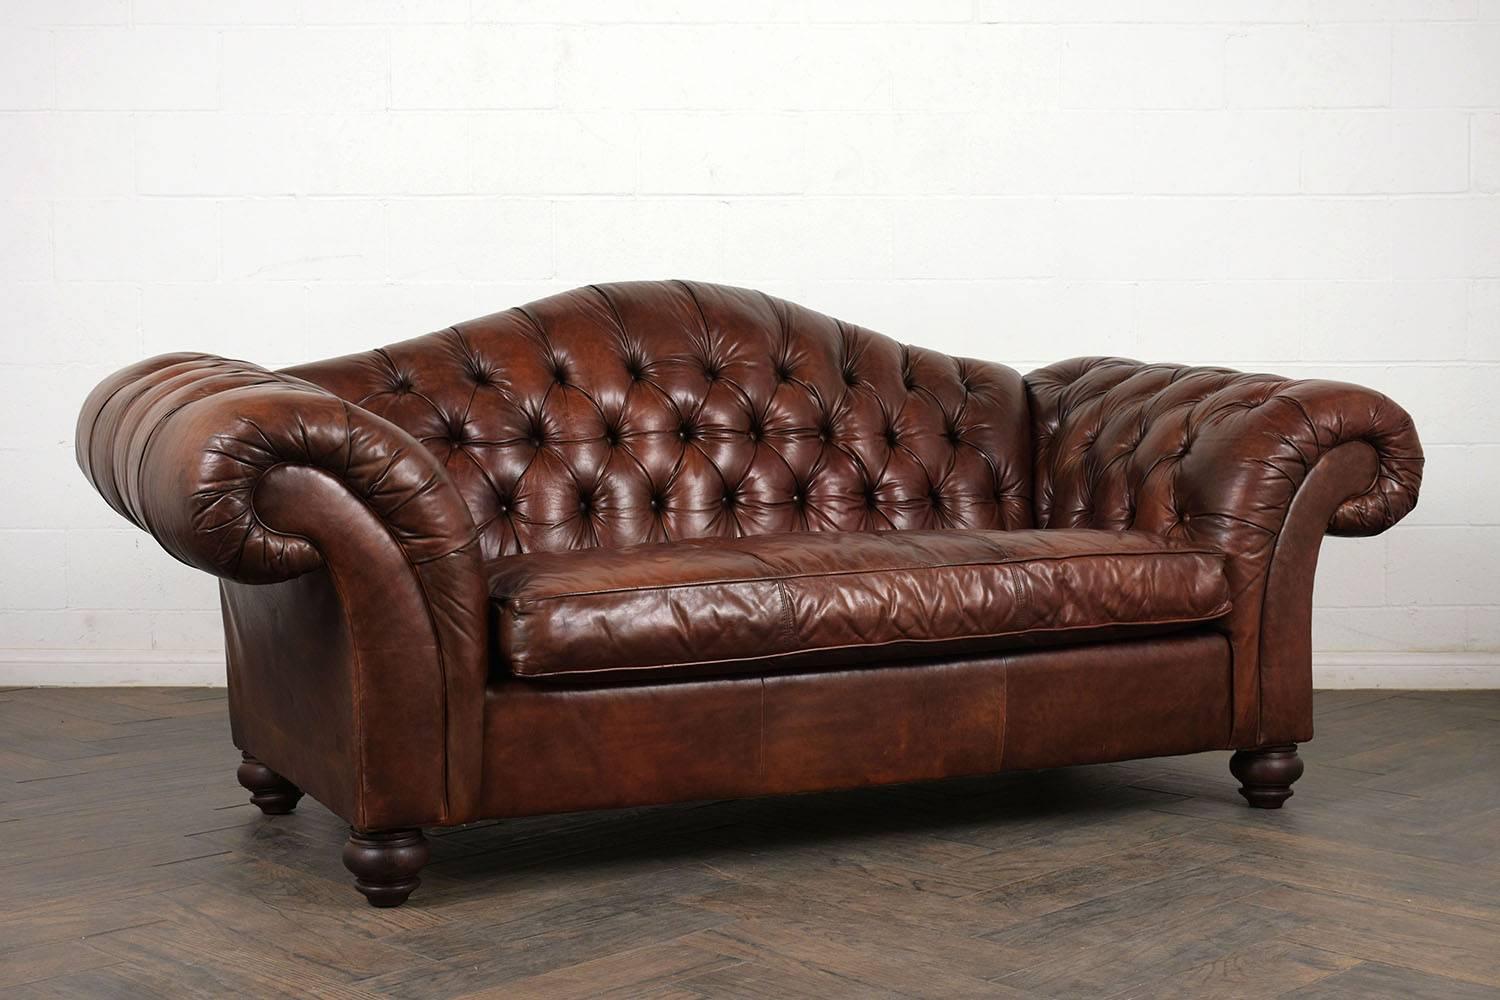 This 1970s Chesterfield sofa has a camel back profile with exaggerated scroll arms. The sofa is upholstered in a rich brown color with tufted details on the back and arms with single piping trim details. There is a single comfortable cushion that